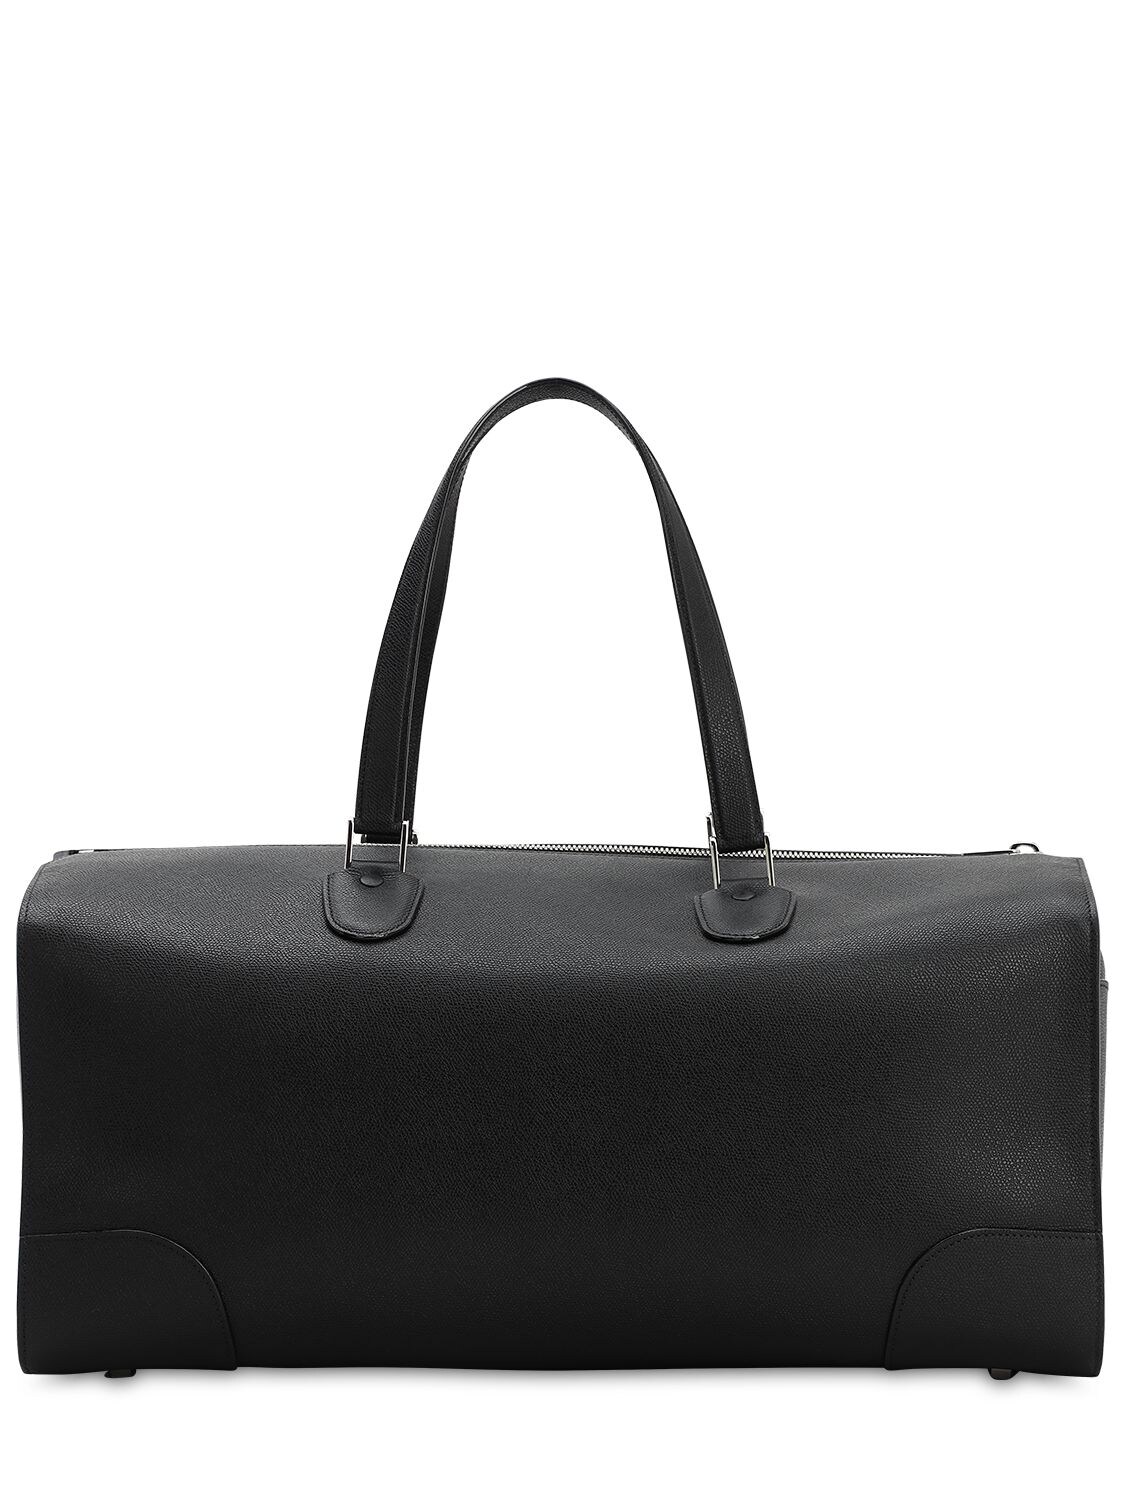 Moncler Genius Moncler X Valextra Leather Tote Bag In Black